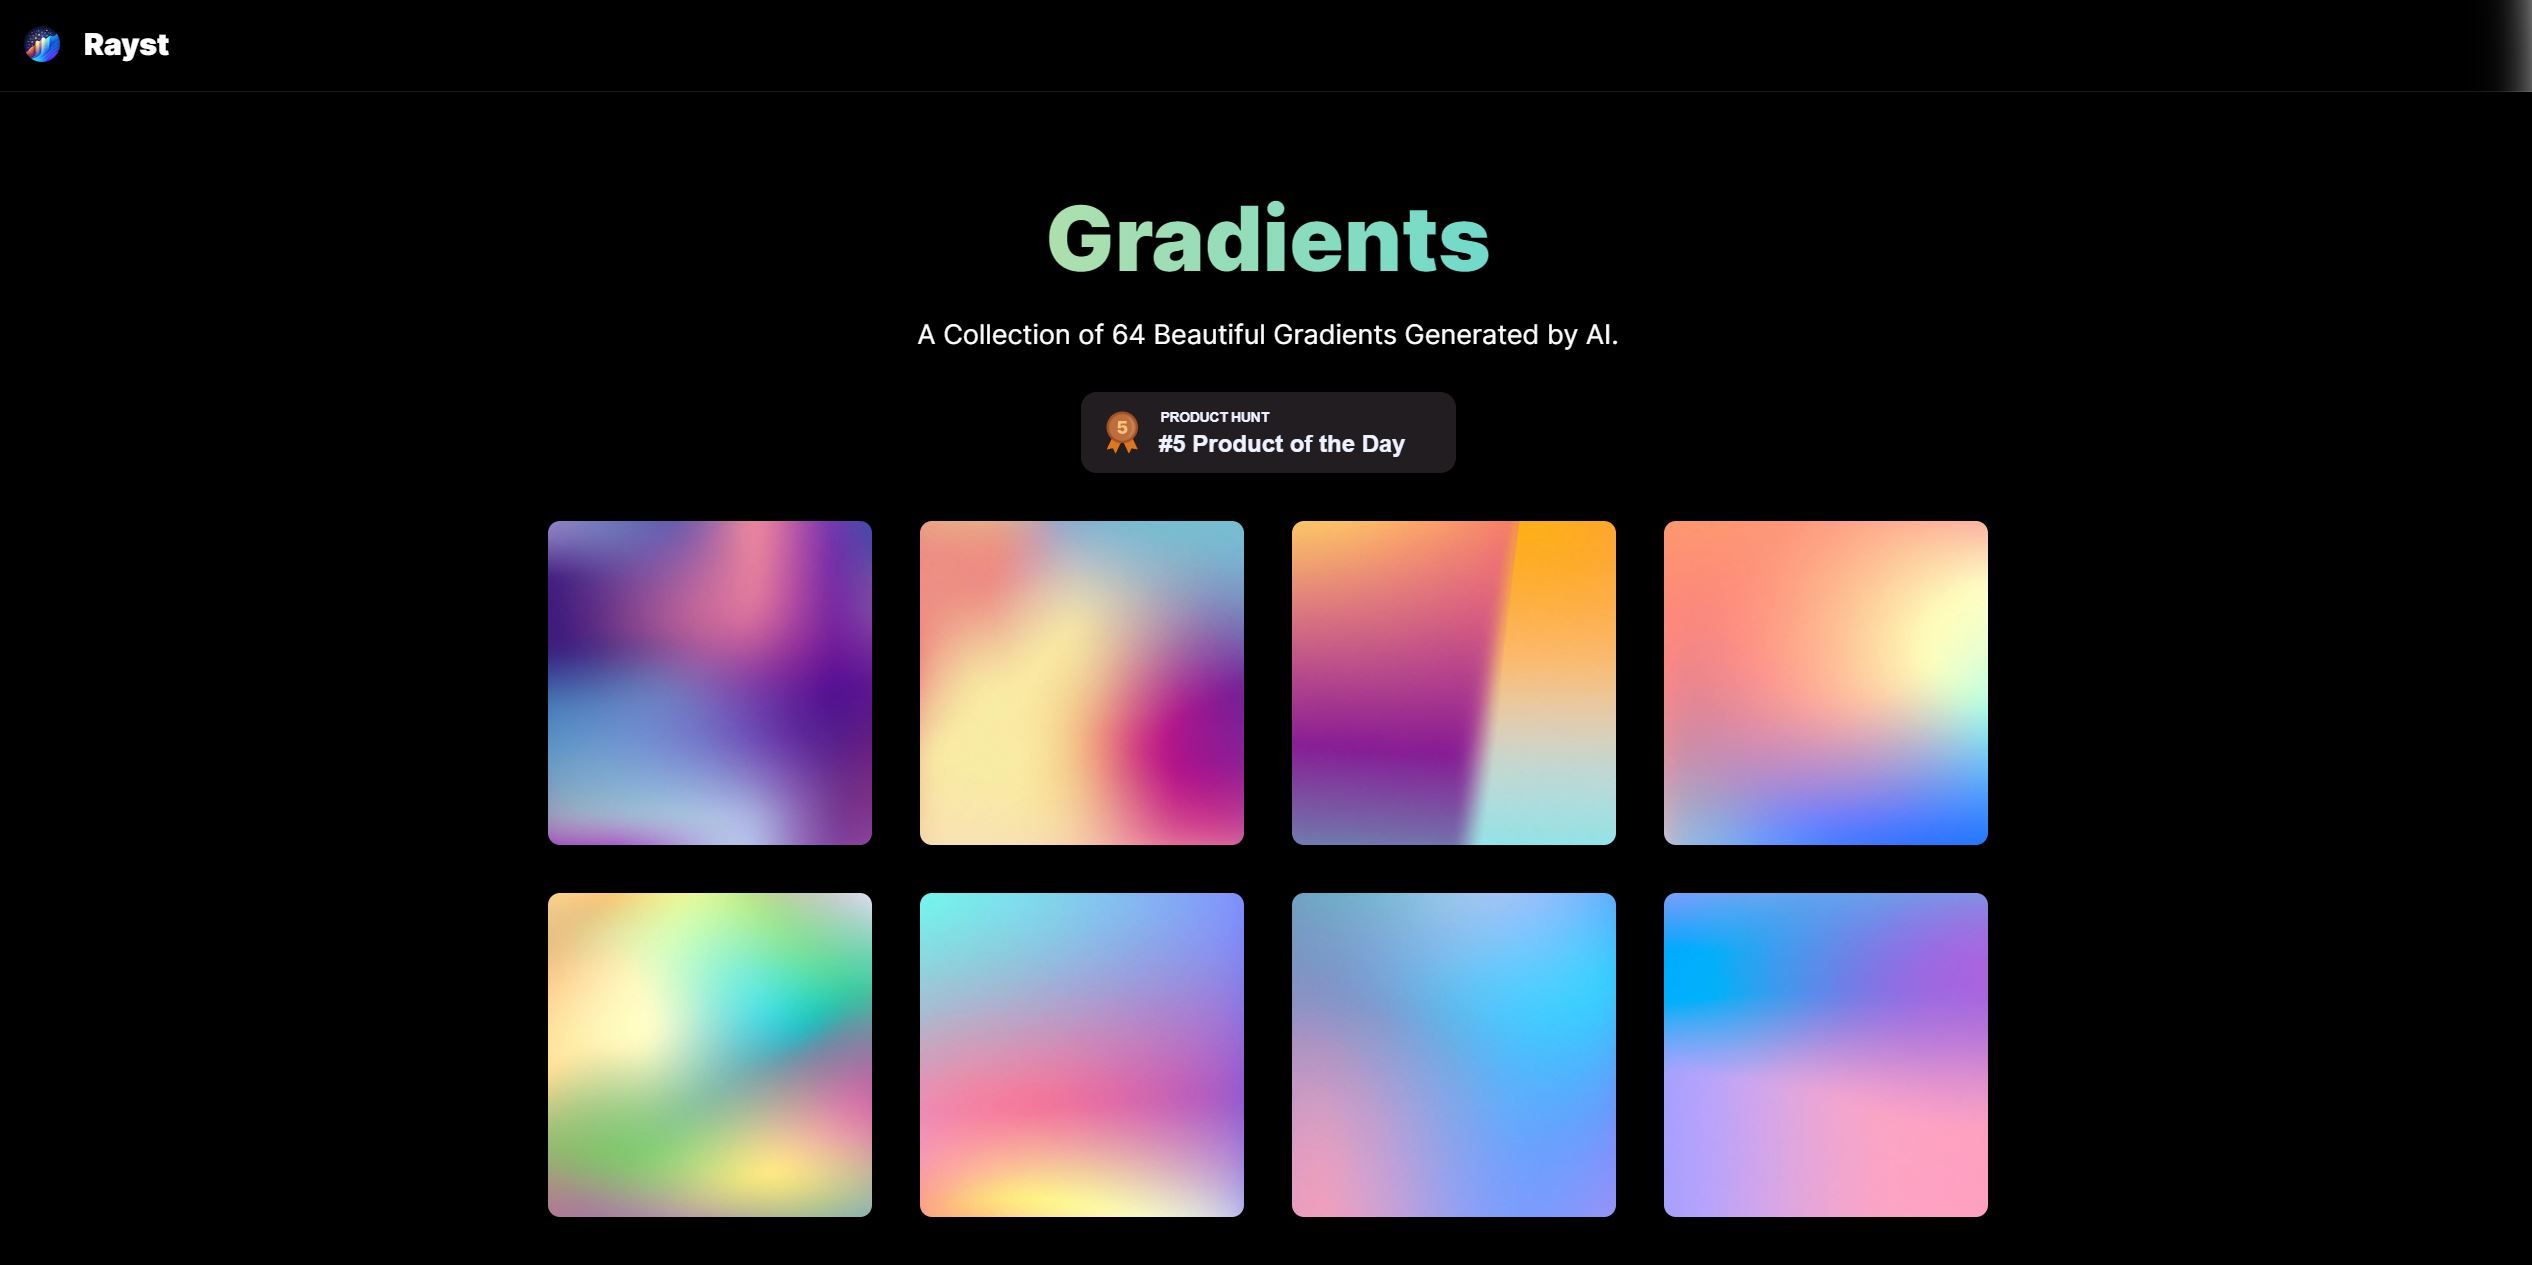 Rayst Gradients